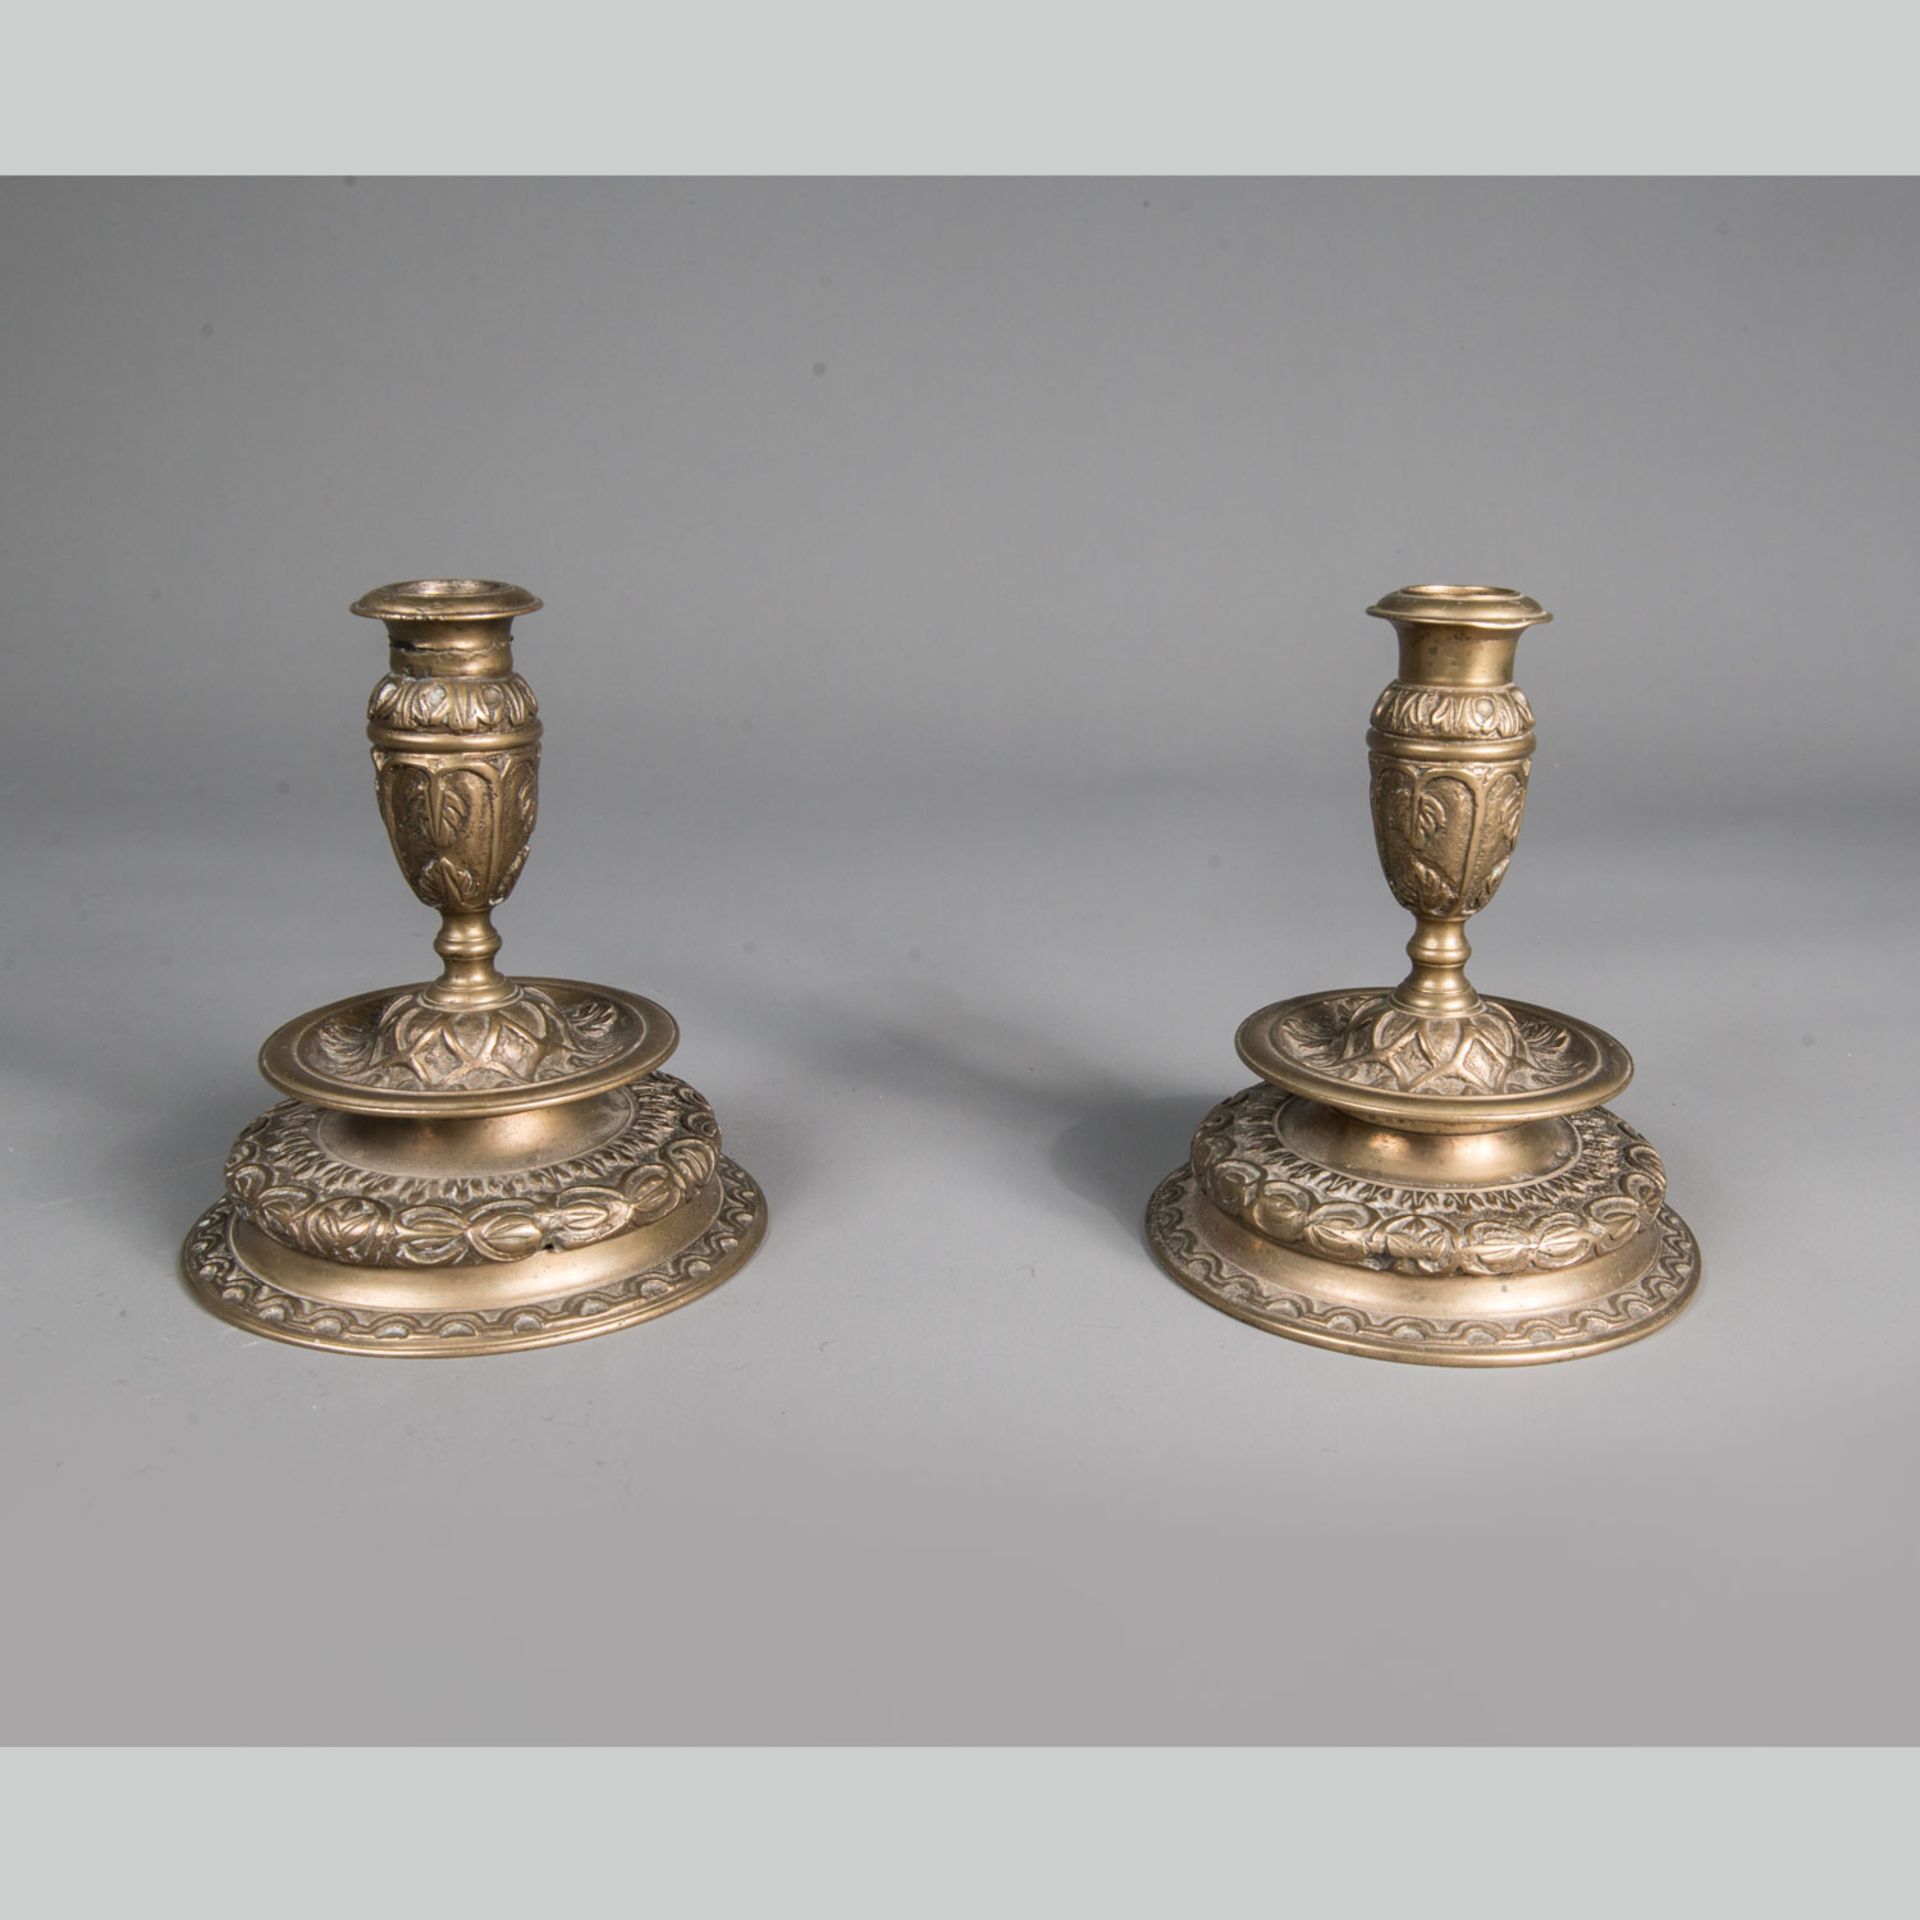 Pair of candle sticks in Renaissance manner